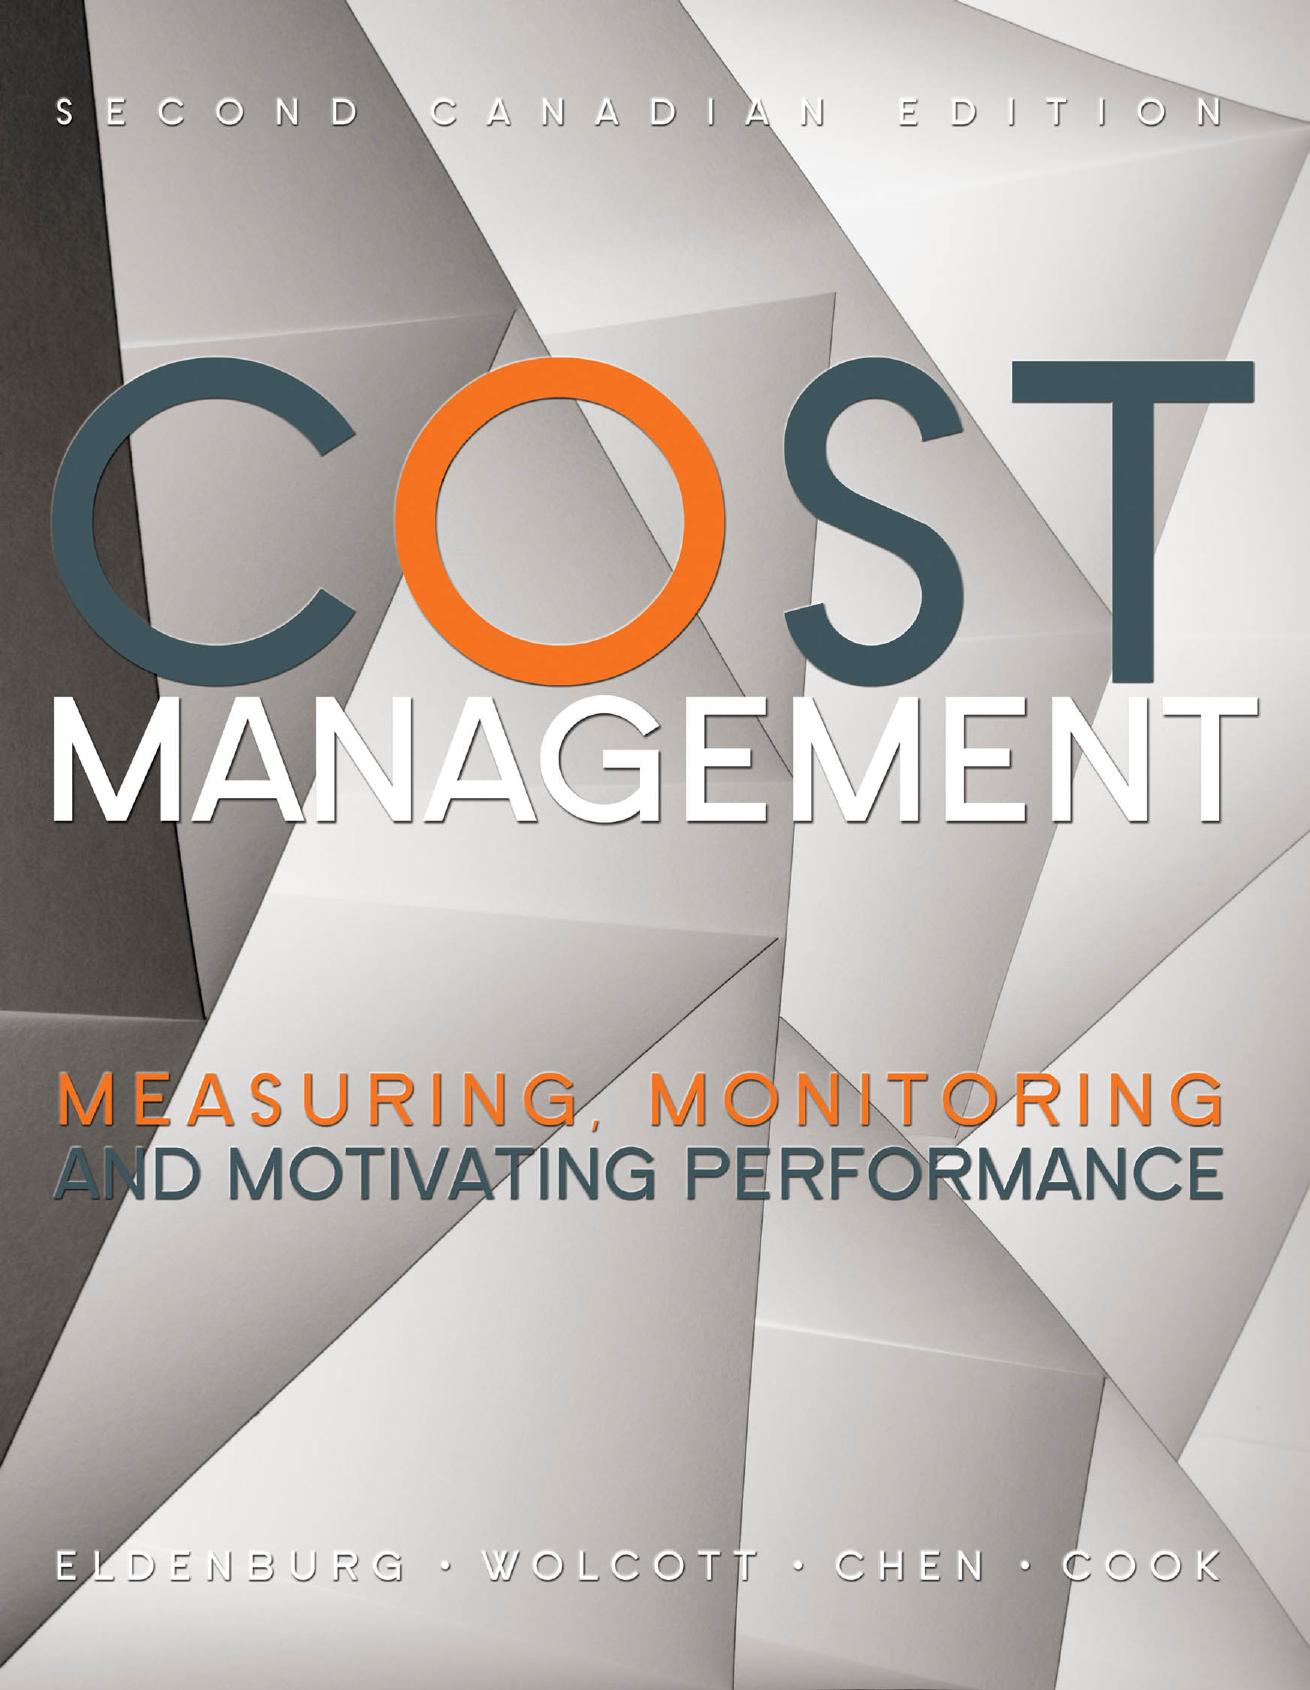 Cost Management Measuring, Monitoring, and Motivating 2nd Edition.jpg